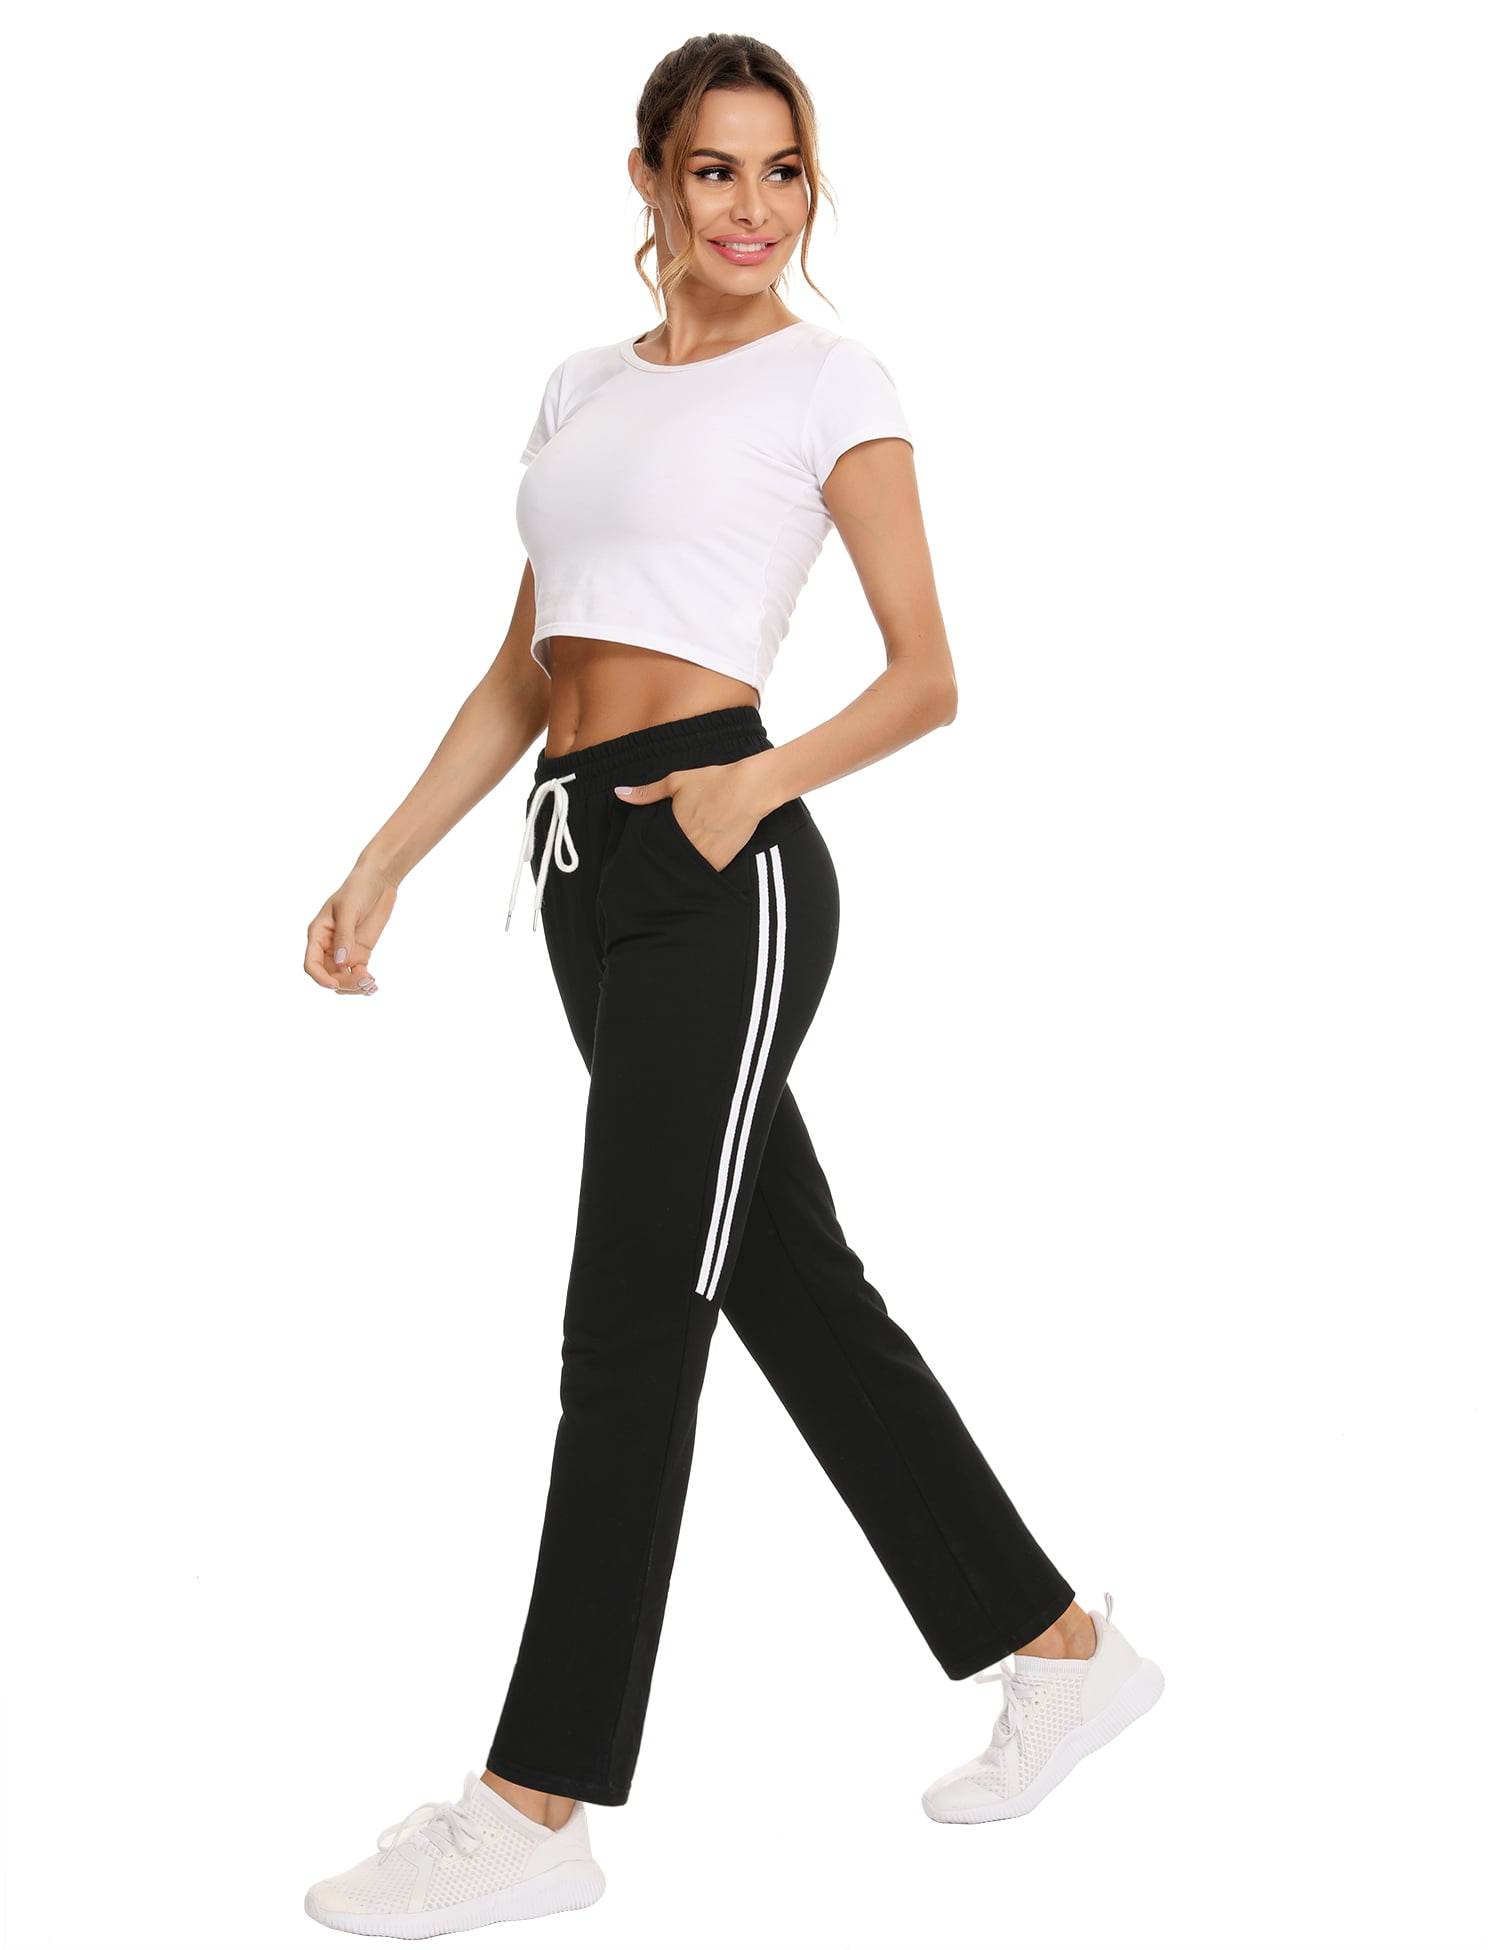 Sykooria Women Yoga Running Pants with Pockets Soft Stretch High Waist Sweatpants for Joggers Workout 